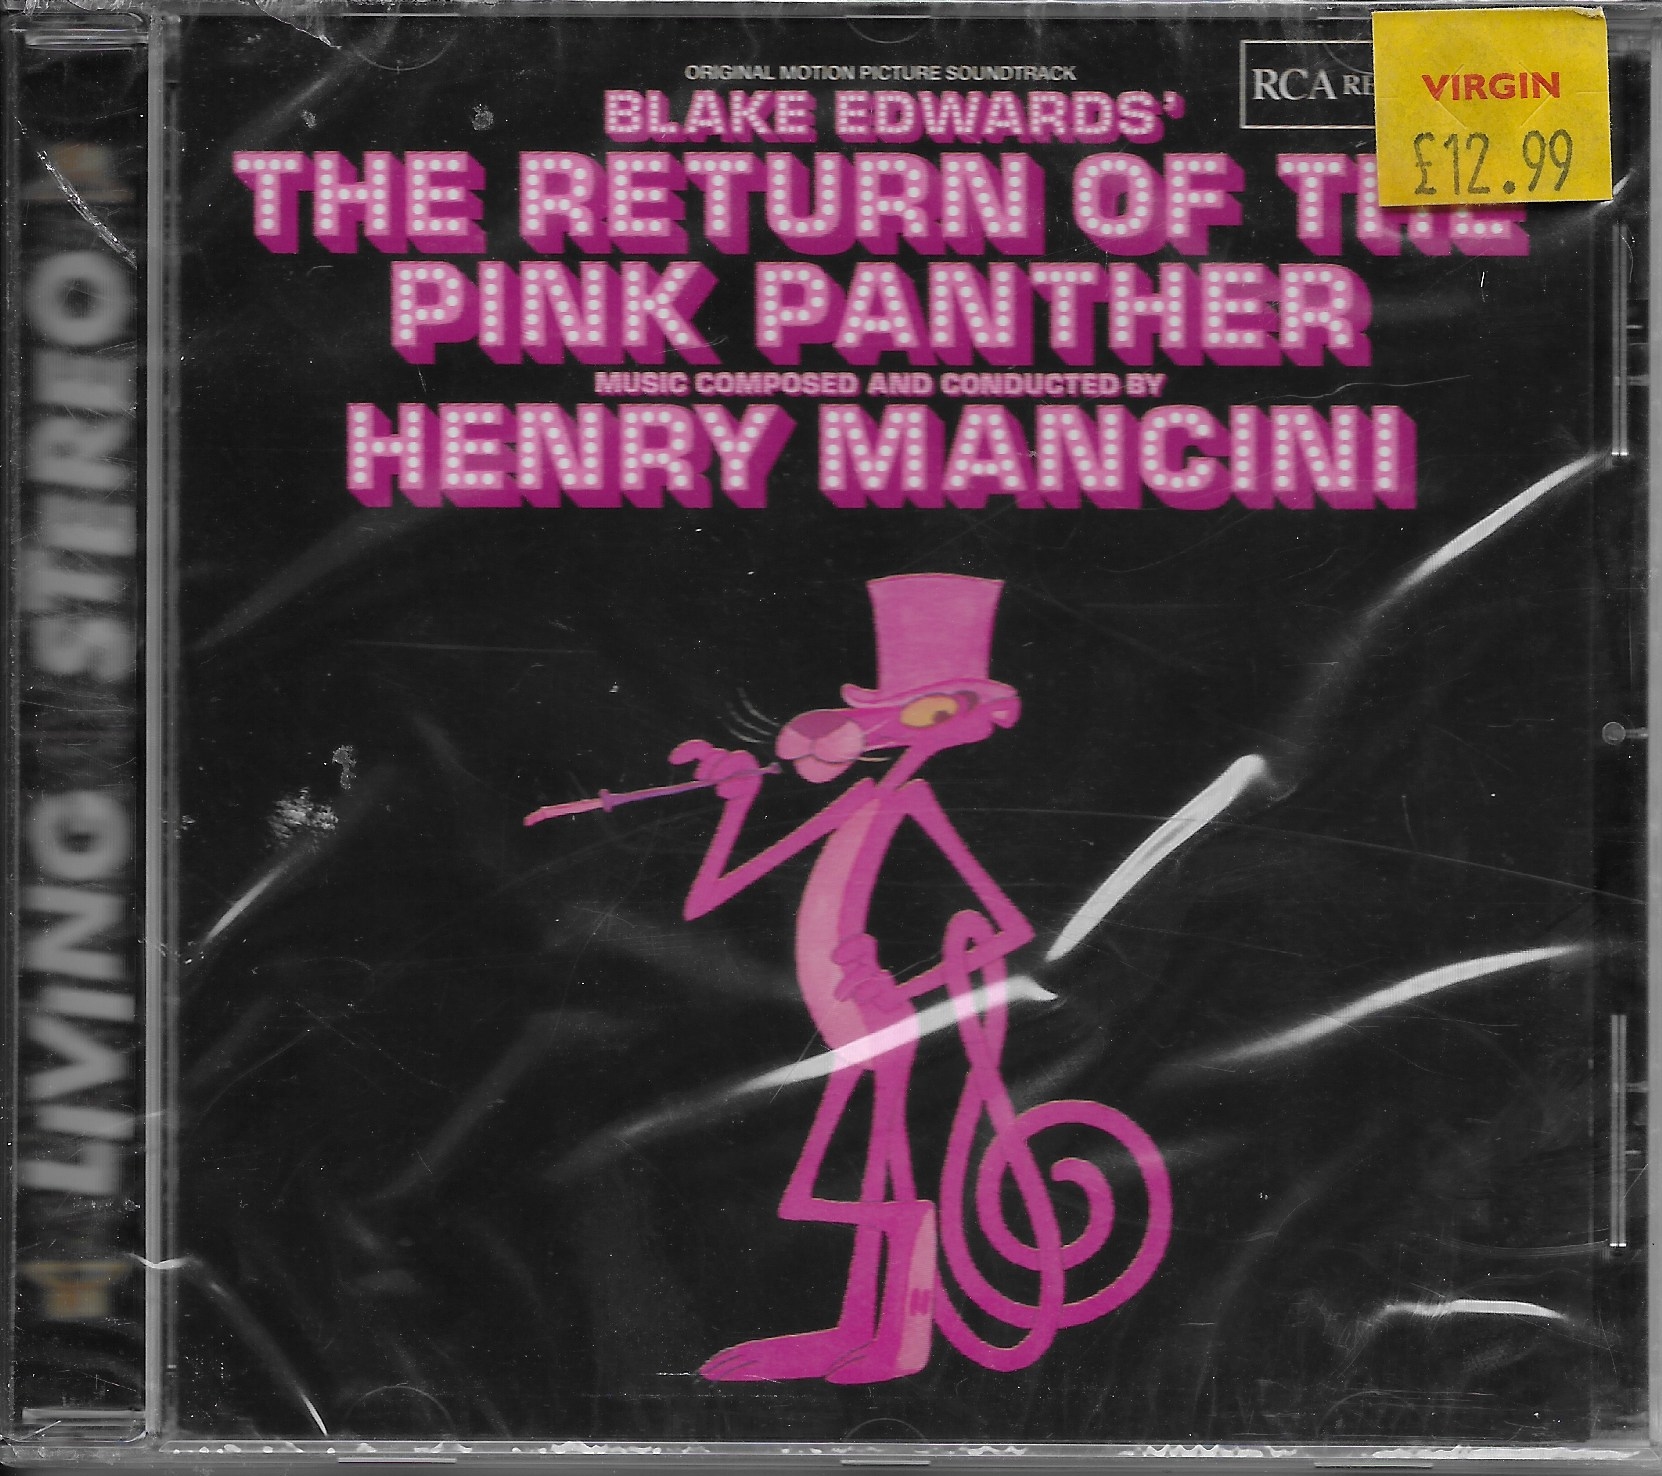 Picture of 7432191381 - 2 The return of the Pink Panther (Spanish import) by artist Henry Mancini from ITV, Channel 4 and Channel 5 cds library